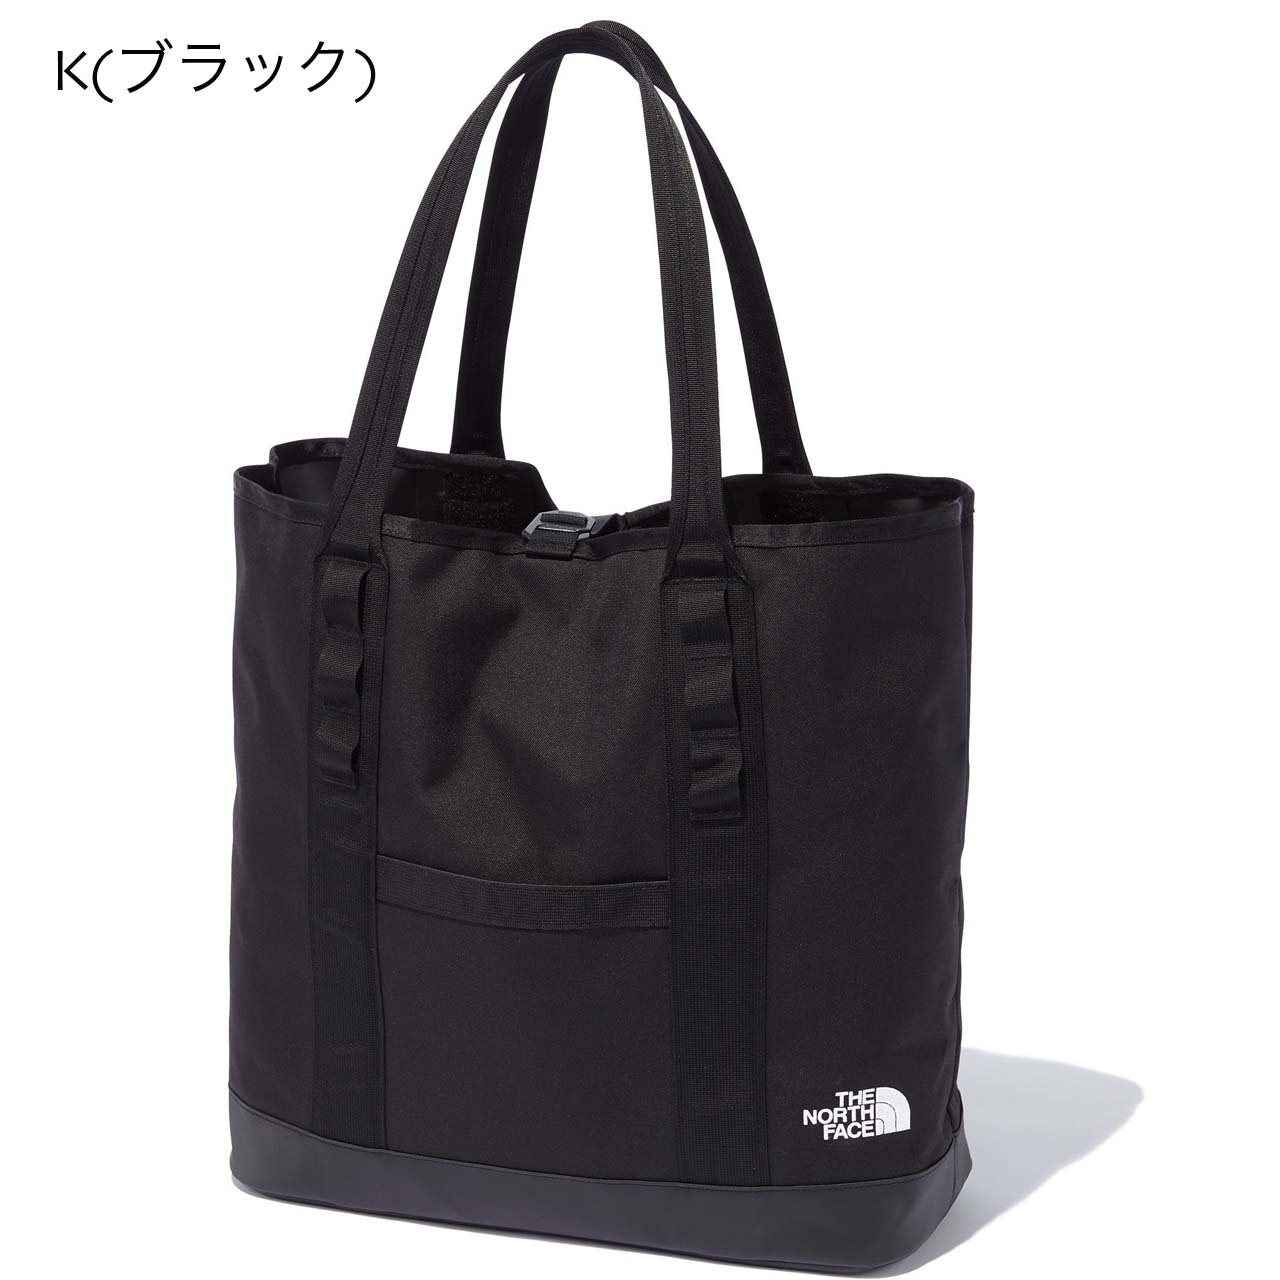 THE NORTH FACE [ザ・ノース・フェイス] Fieludens Gear Tote S [NM82202]_f0051306_09275009.jpg